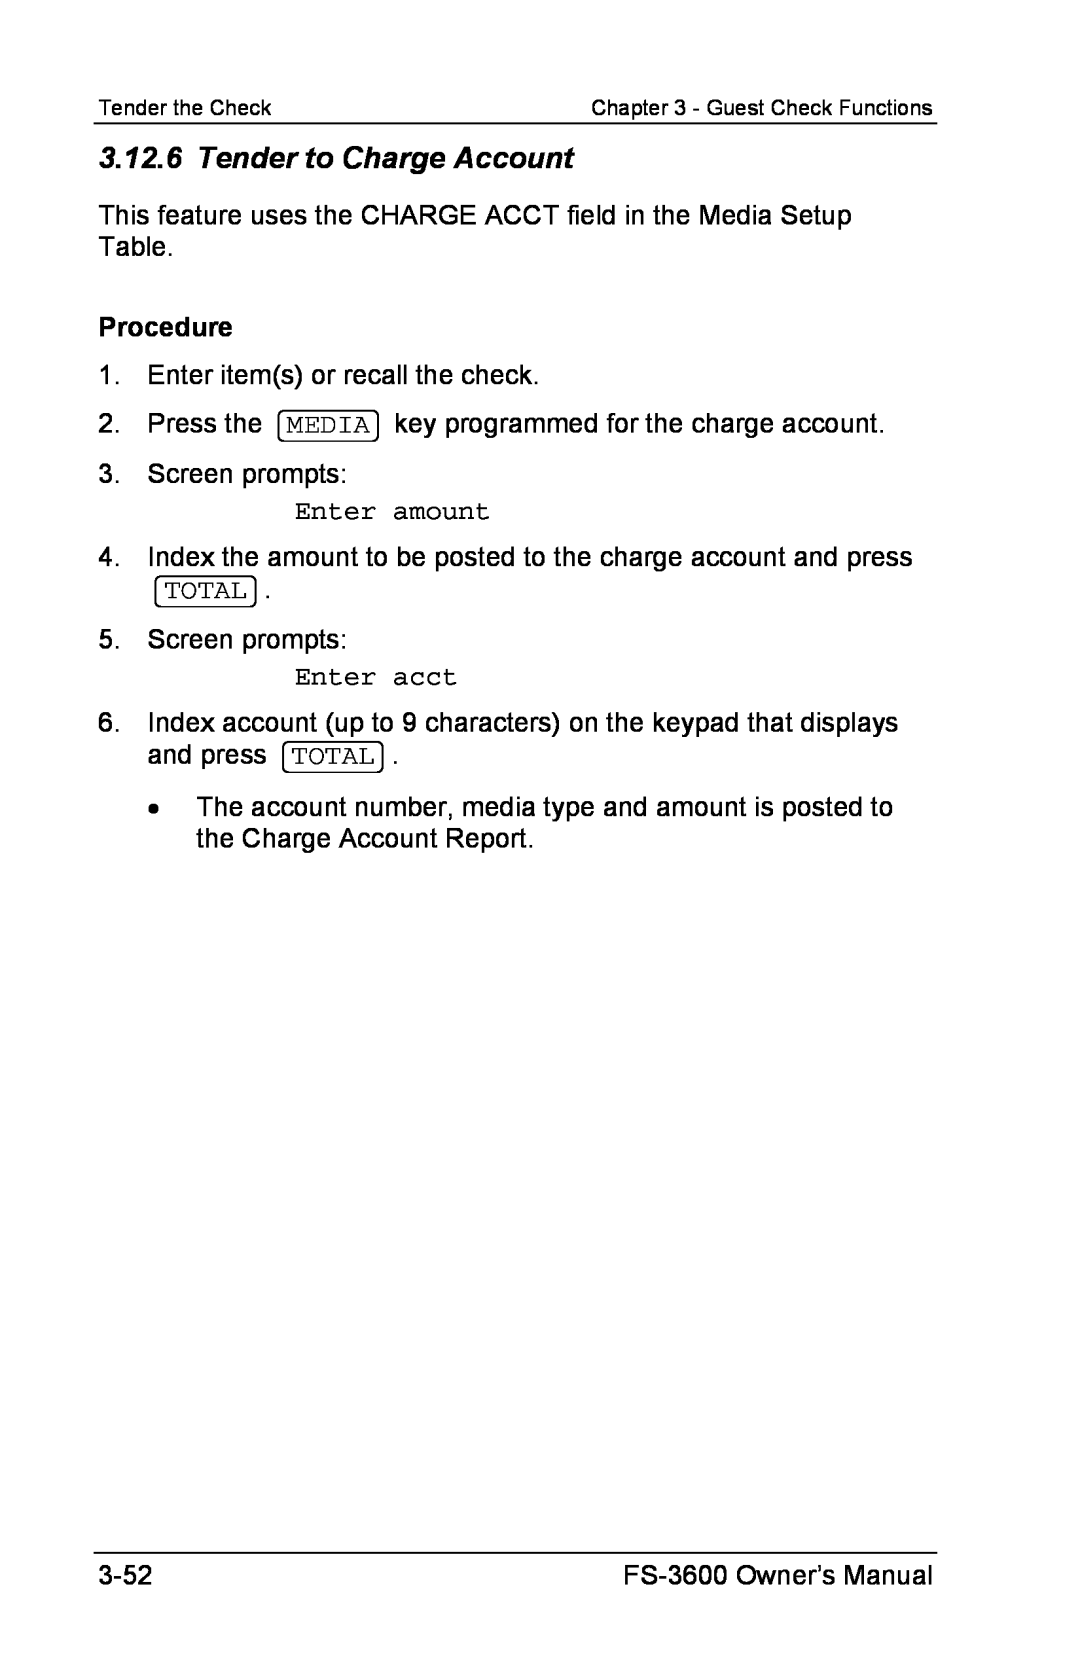 Toshiba FS-3600 owner manual Tender to Charge Account, Procedure 